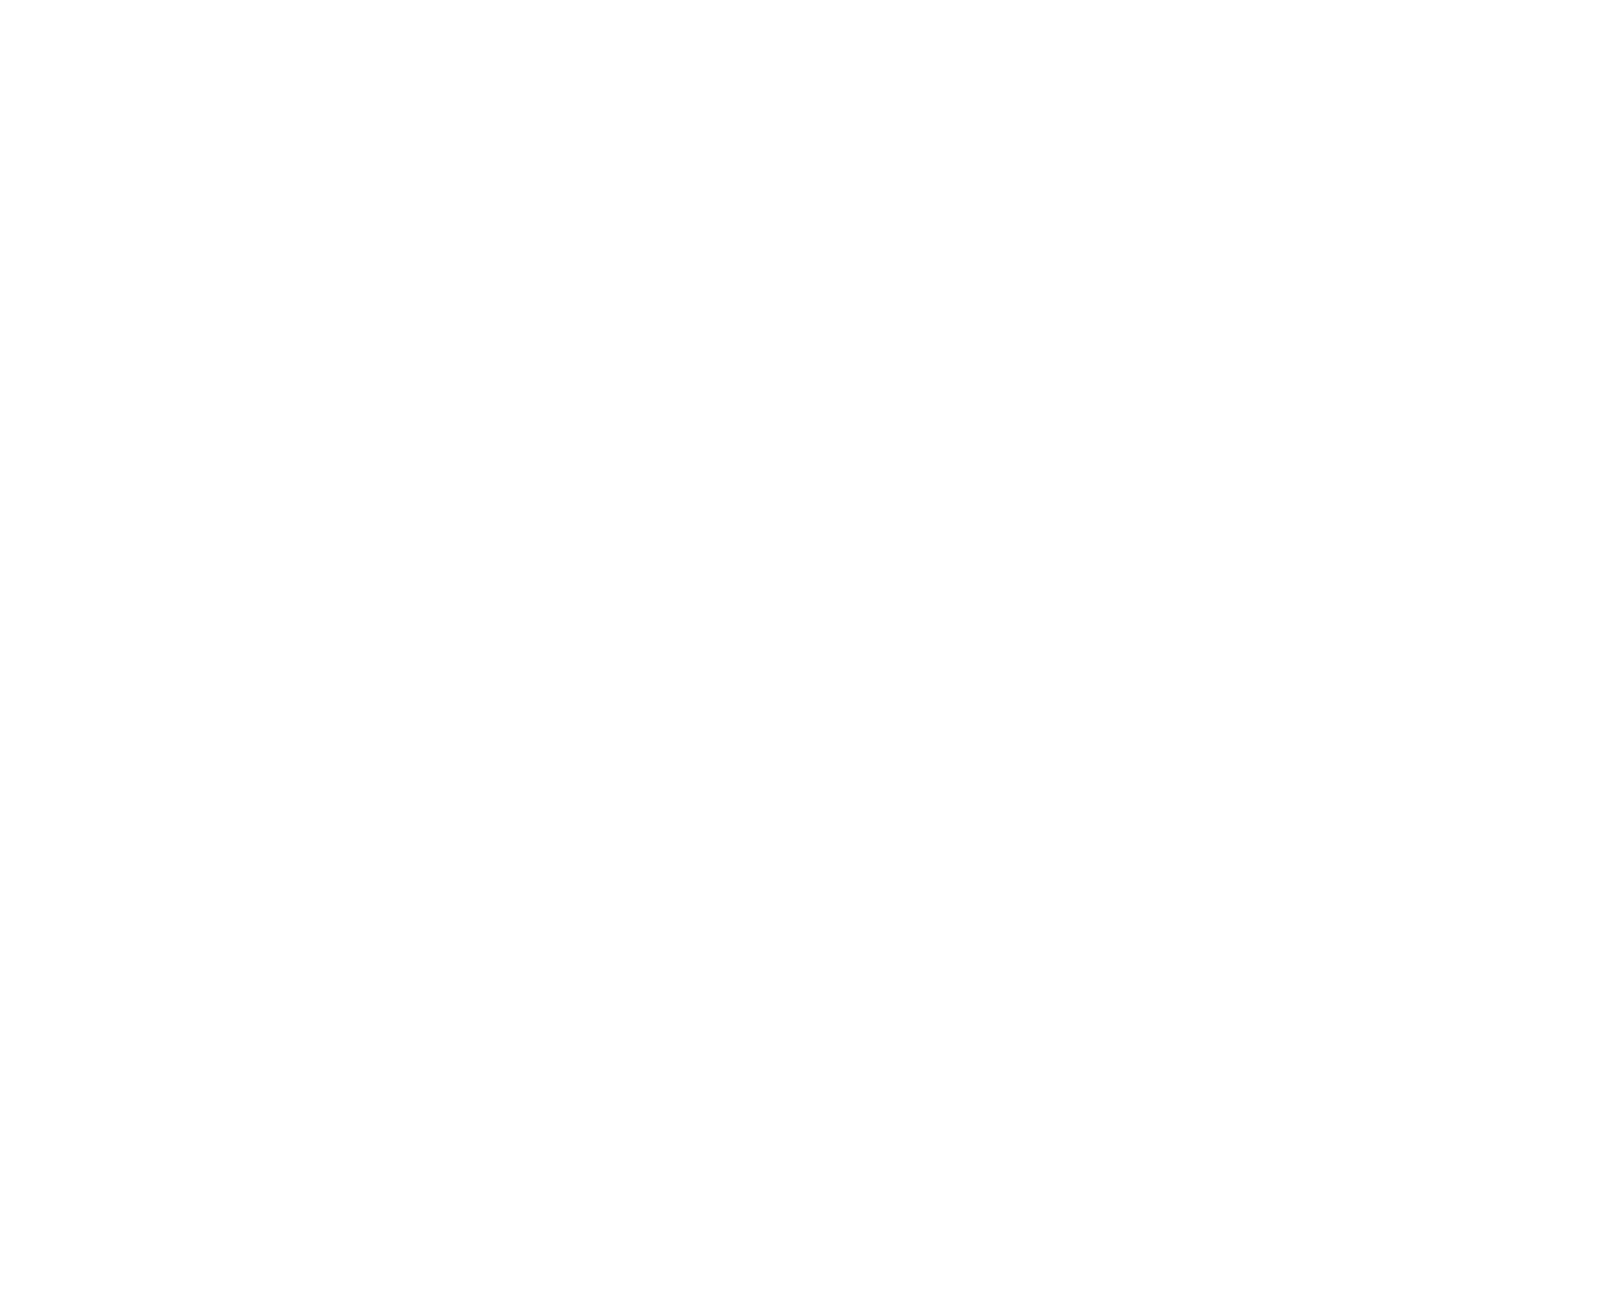 Curlyboards